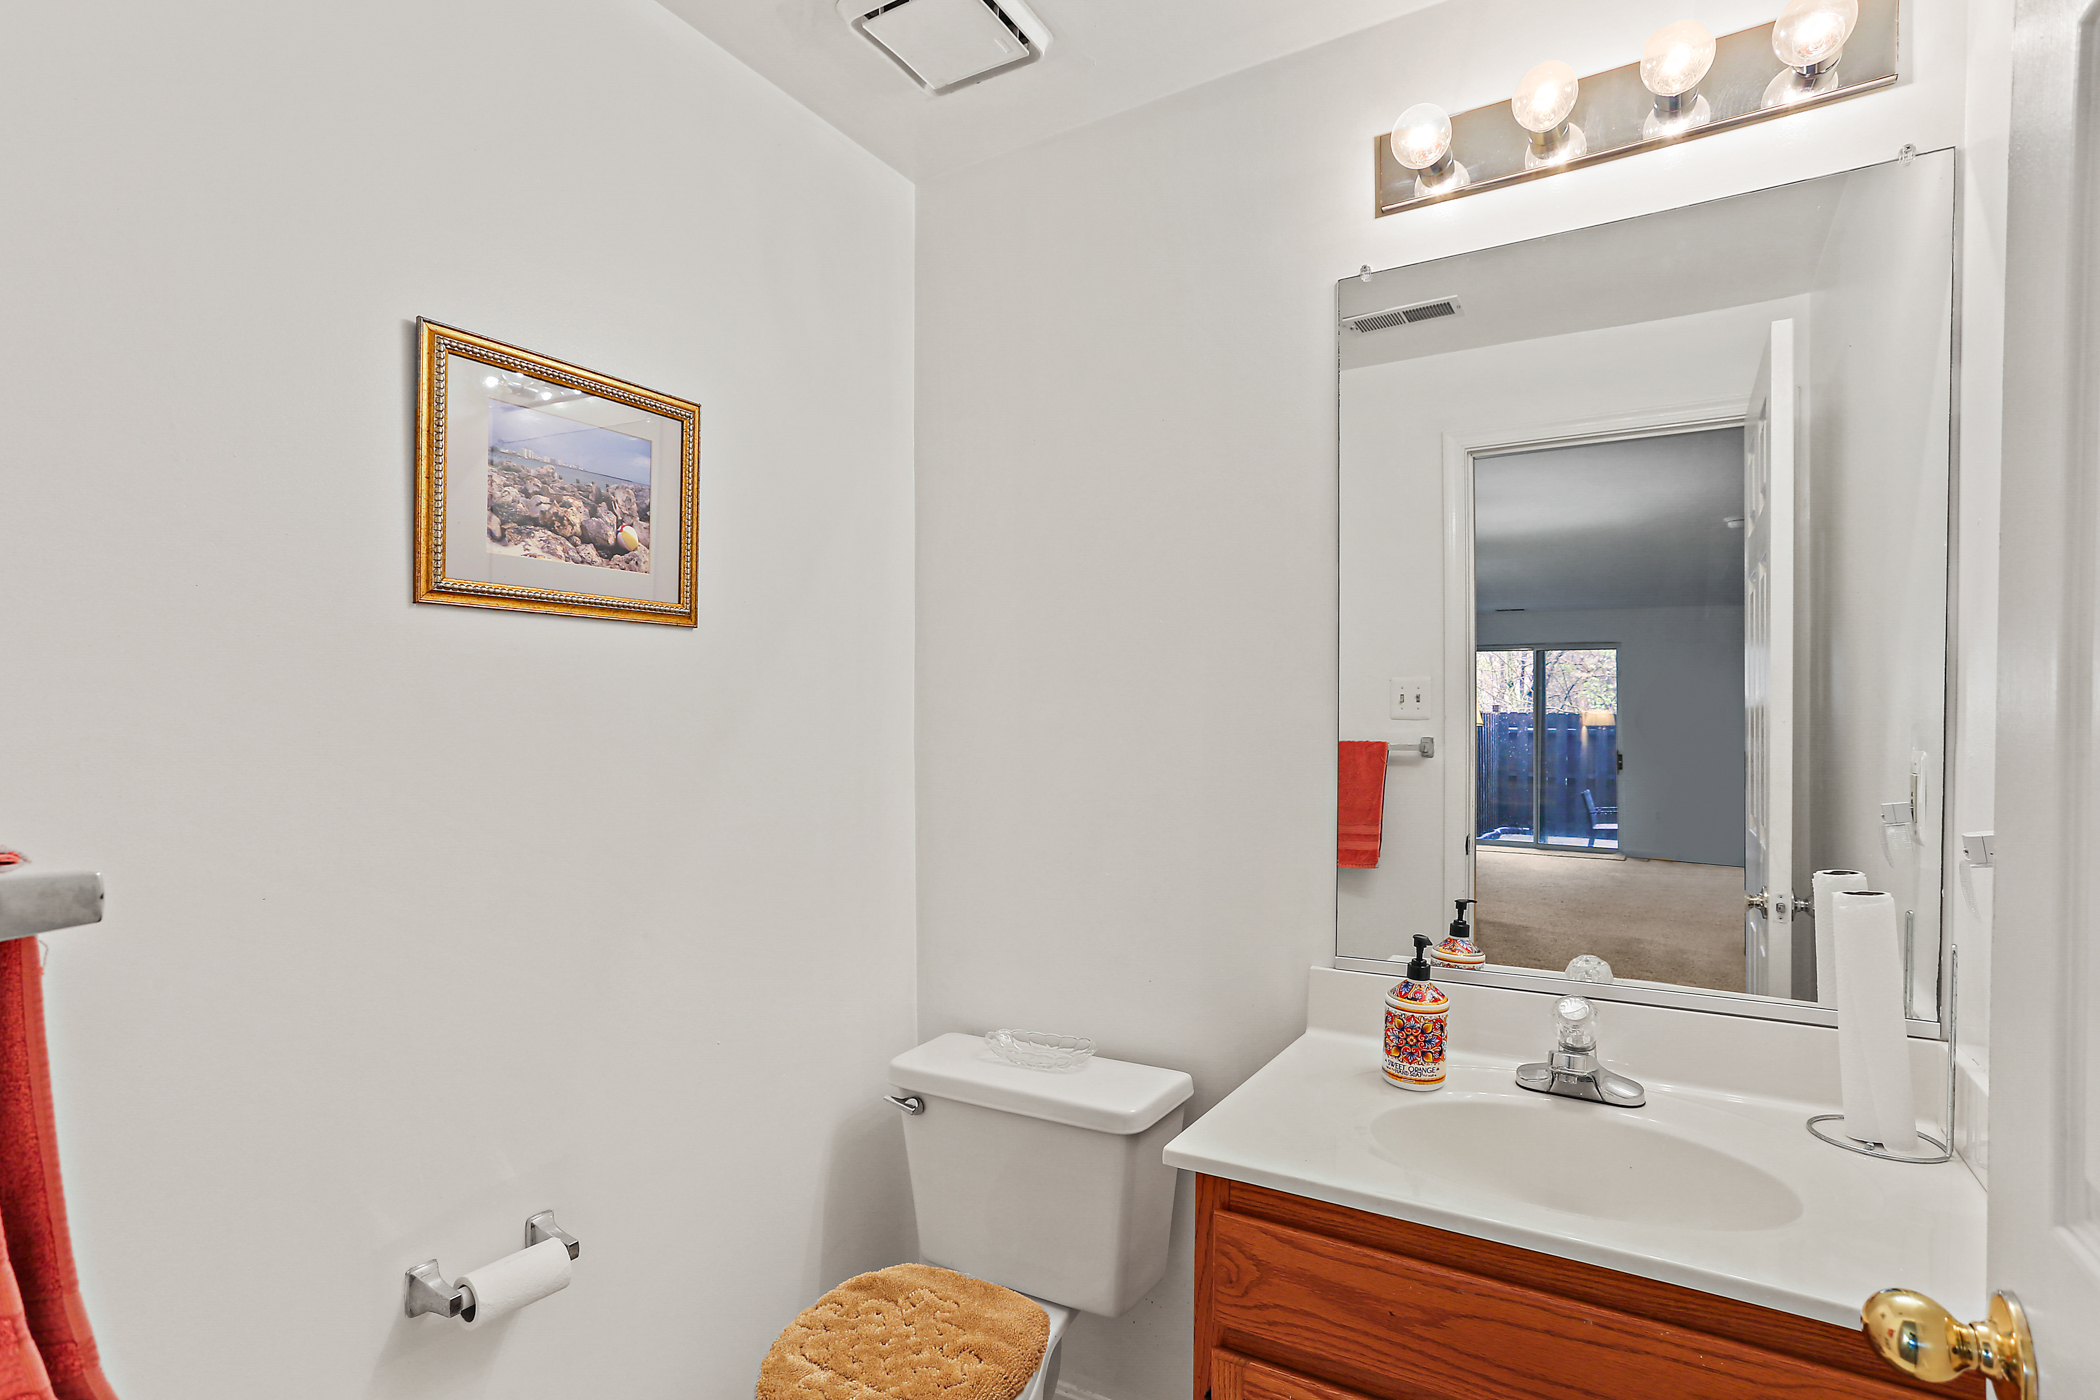 6203 Knolls Ct, powder room with reflection of basement in the mirror.